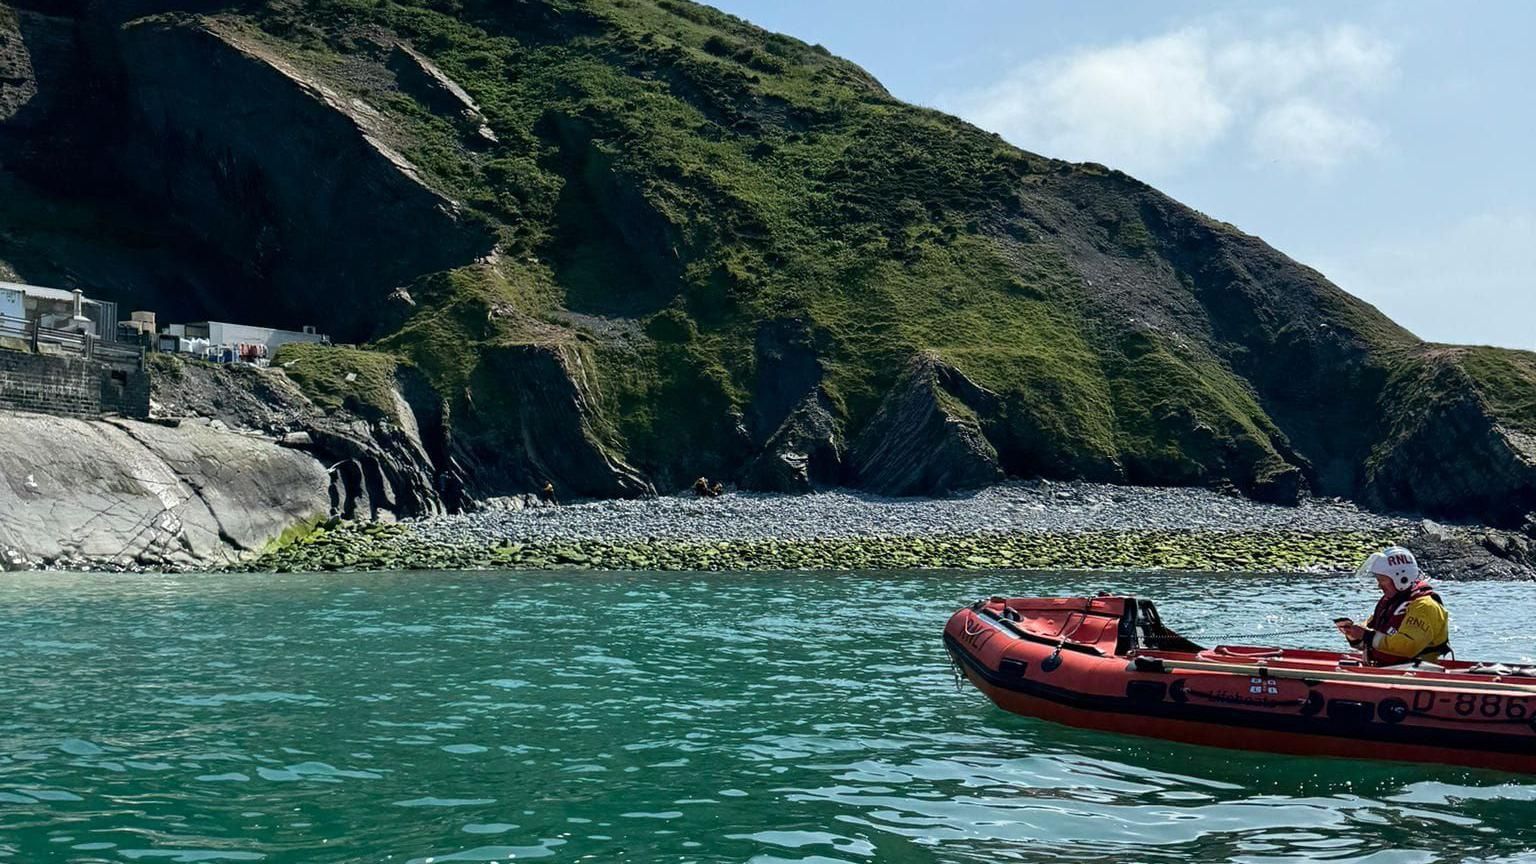 A person was rescued after falling down a cliff